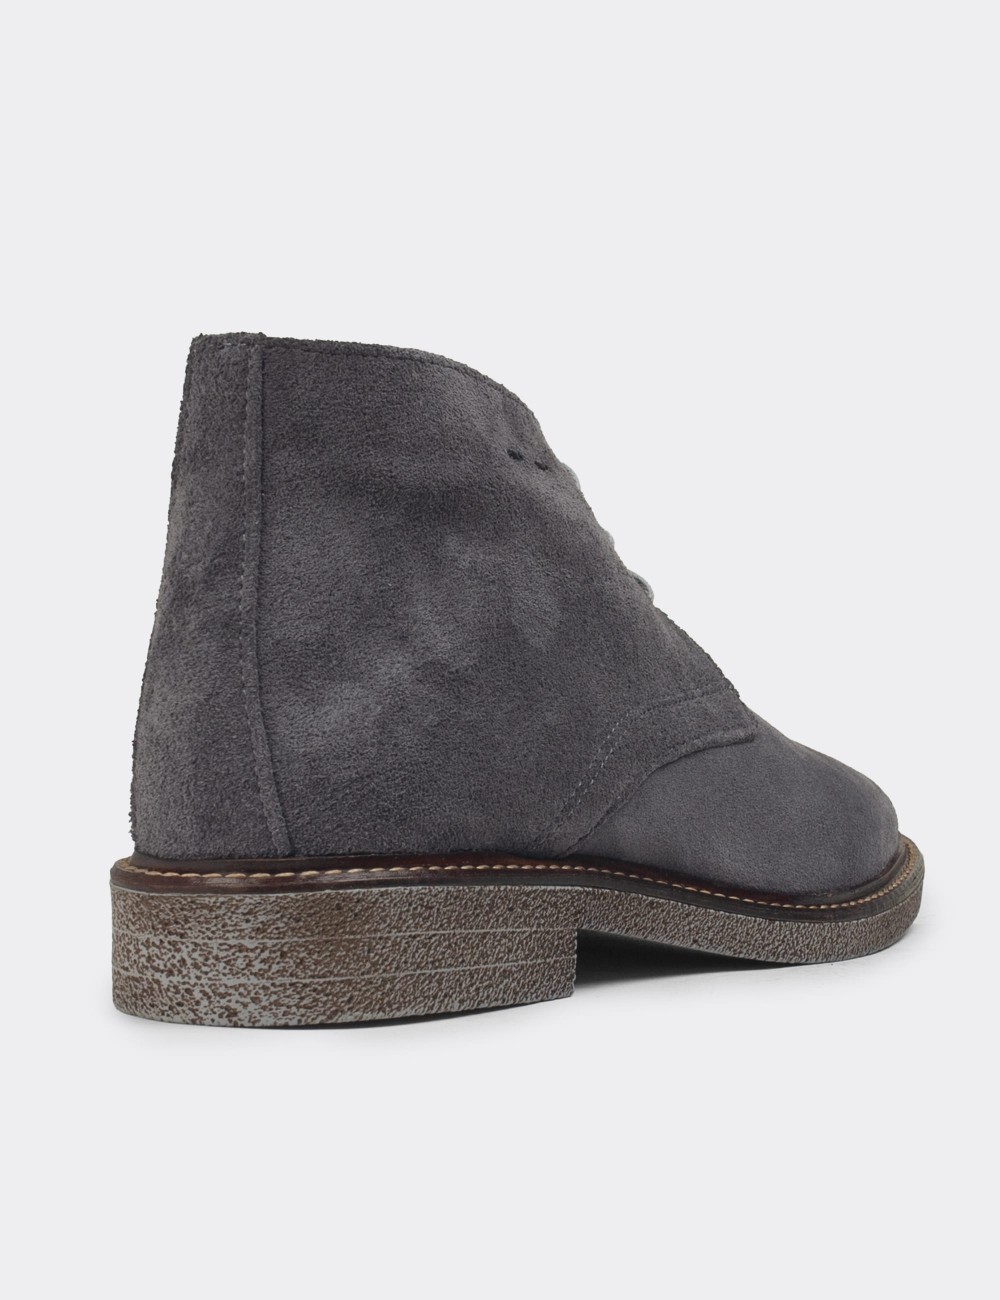 Gray Suede Leather Desert Boots - 01967ZGRIC01